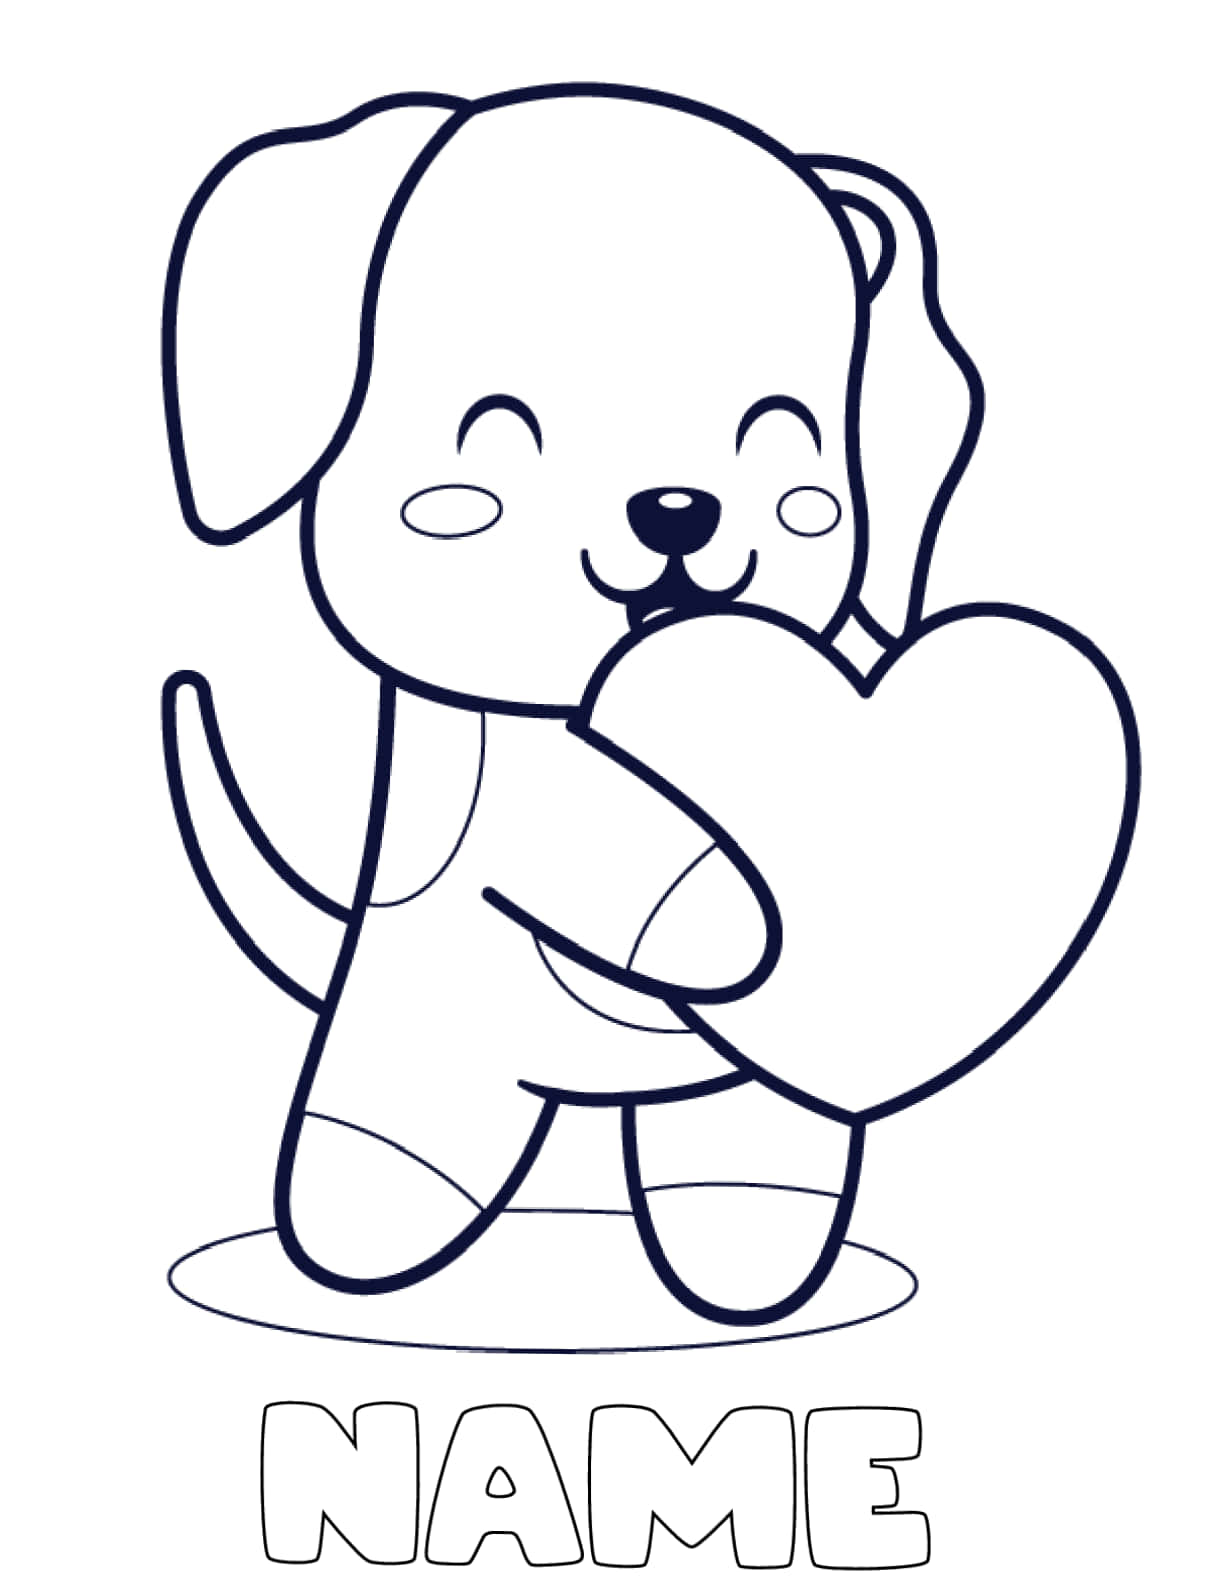 Cute Dog Heart Kids Coloring Picture